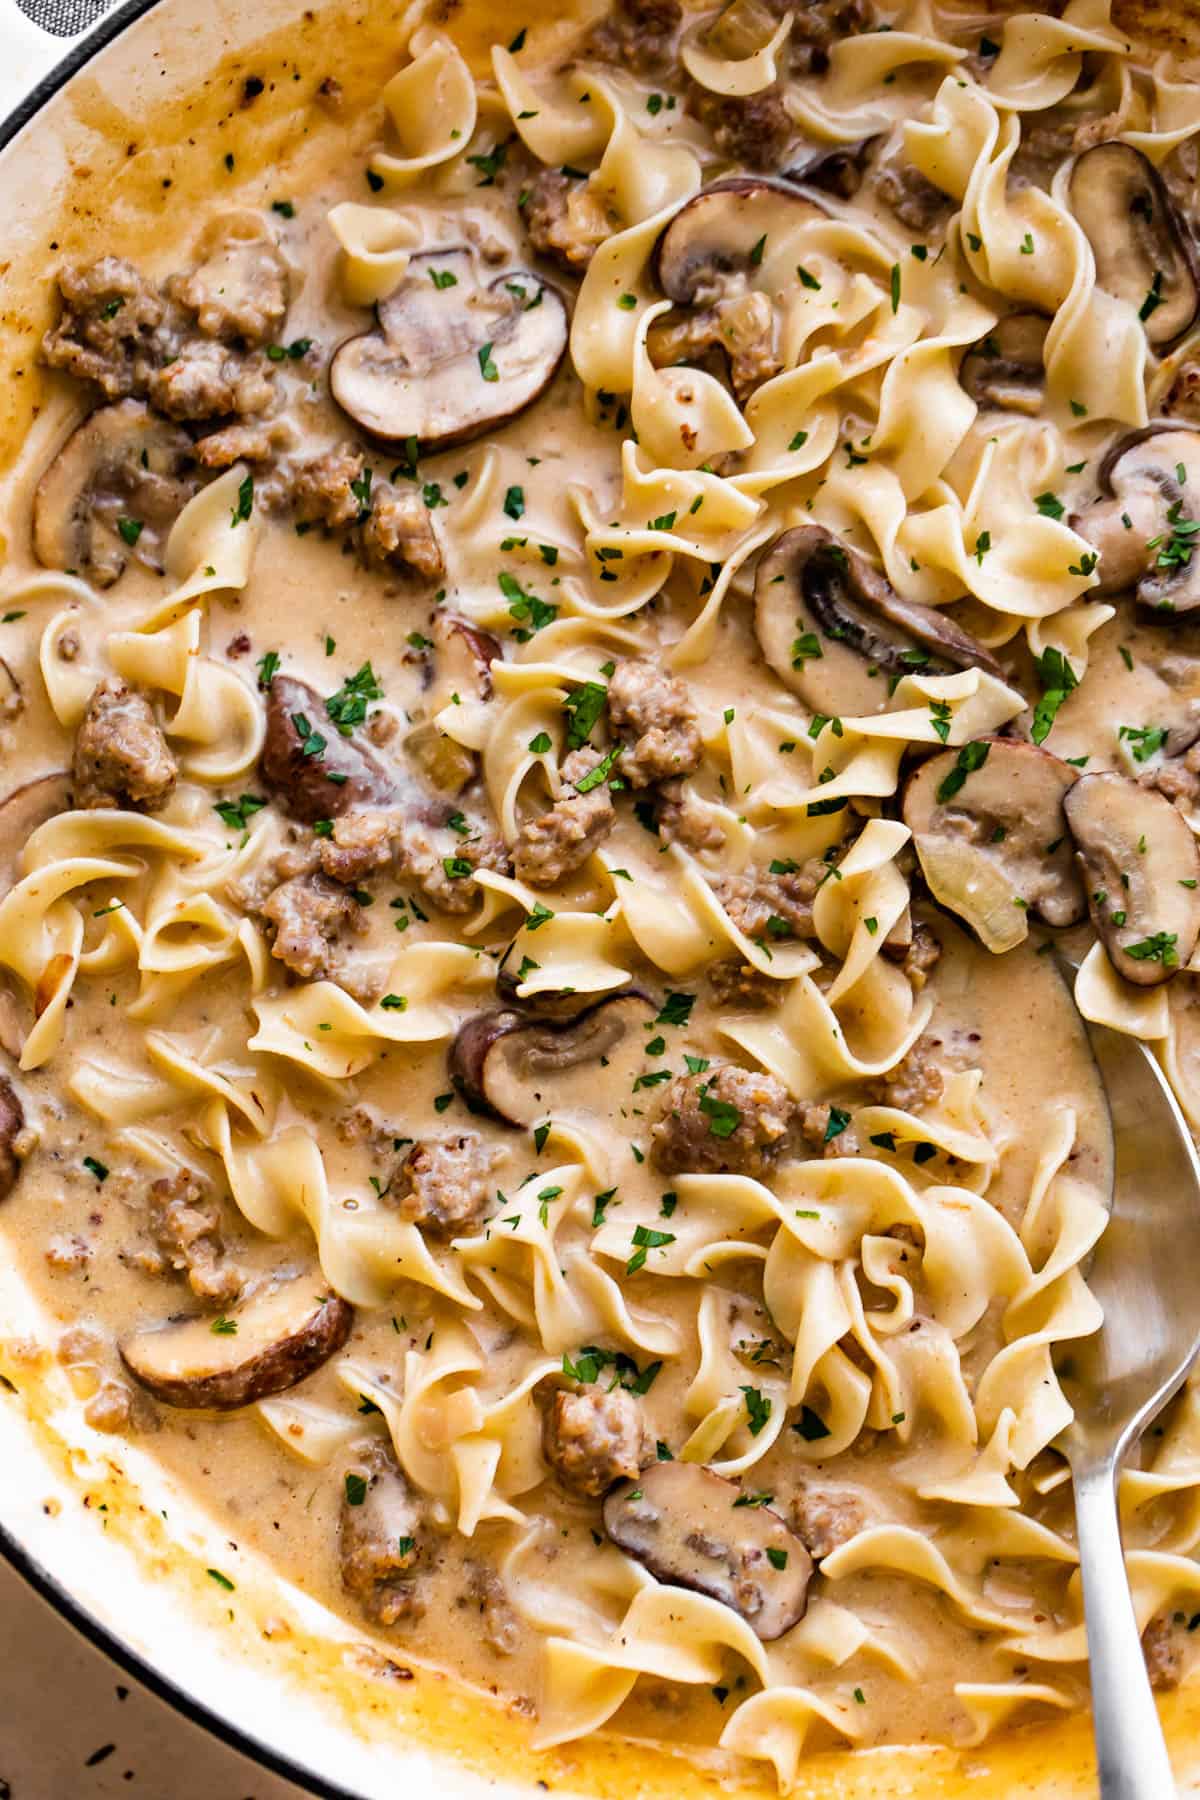 up close shot of beef stroganoff prepared with noodles, mushrooms, and beef.